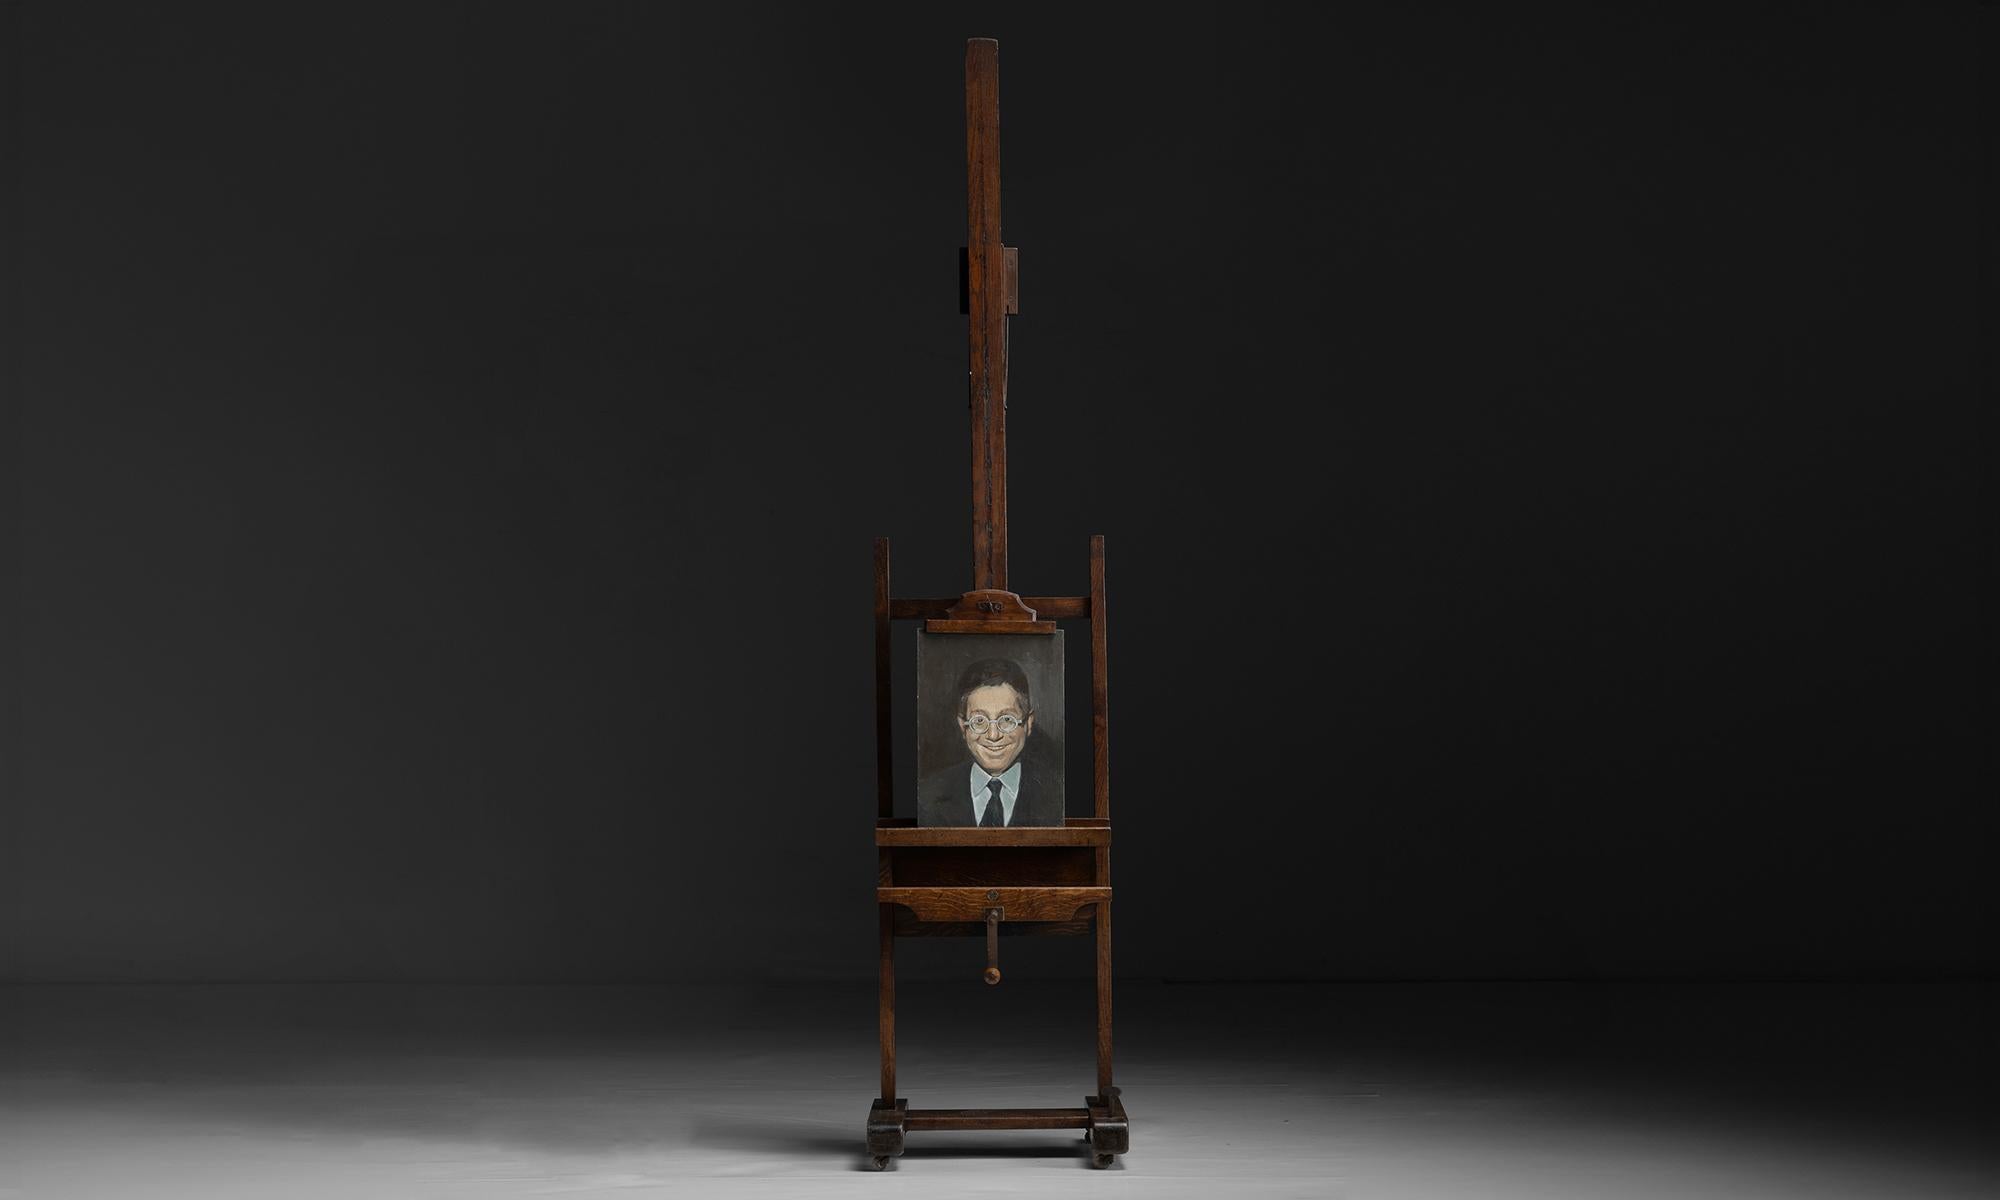 Oak Easel by Robinsons & Co

England circa 1920

Wooden easel on wheels with adjustable height. Oil painting by Goran Djurovic.

22.5”w x 21.5”d x 108”h
